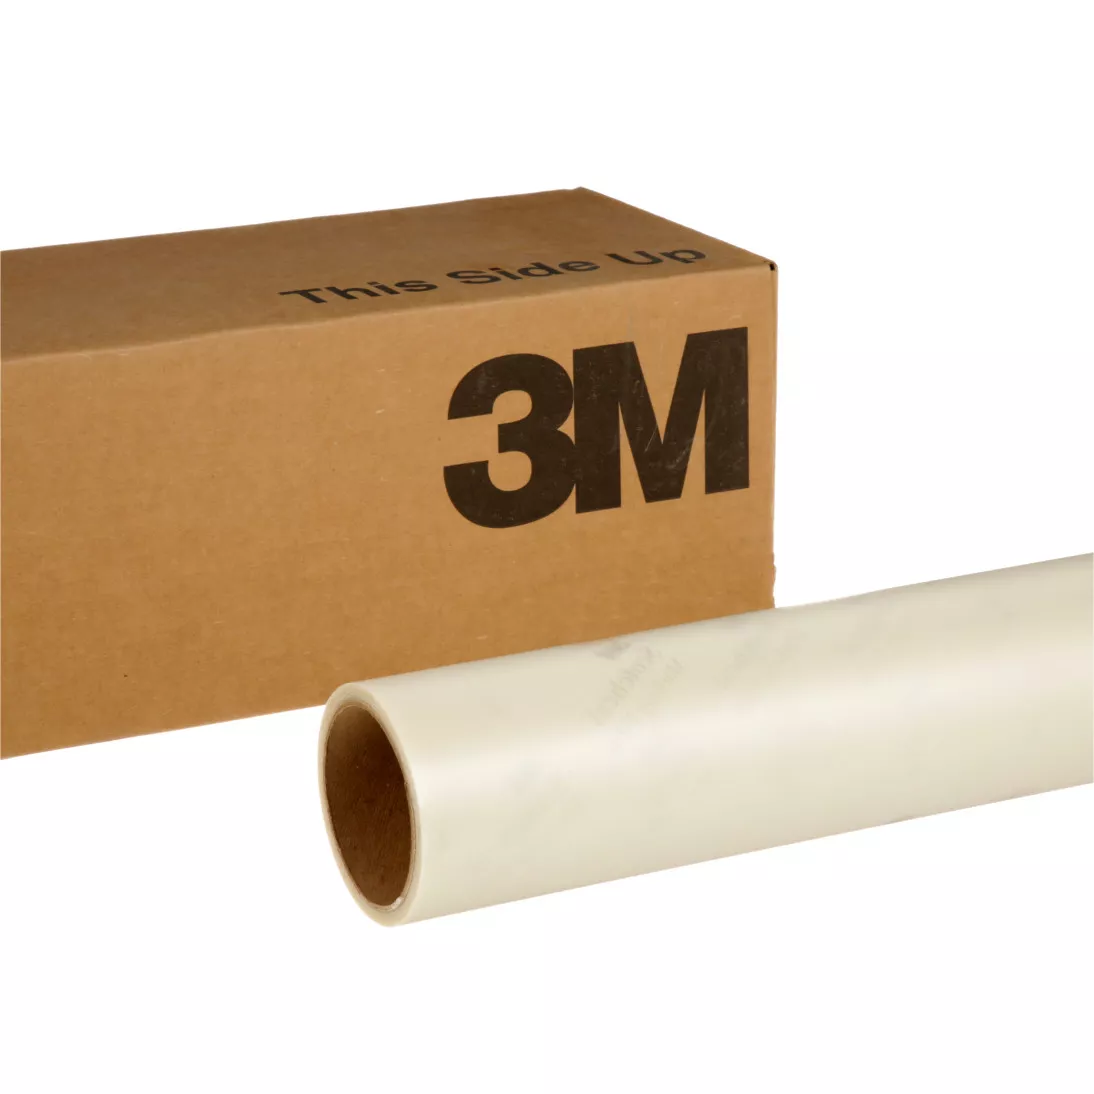 3M™ Scotchcal™ ElectroCut™ Graphic Film 7725SE-314, Dusted Crystal, 48
in x 10 yd